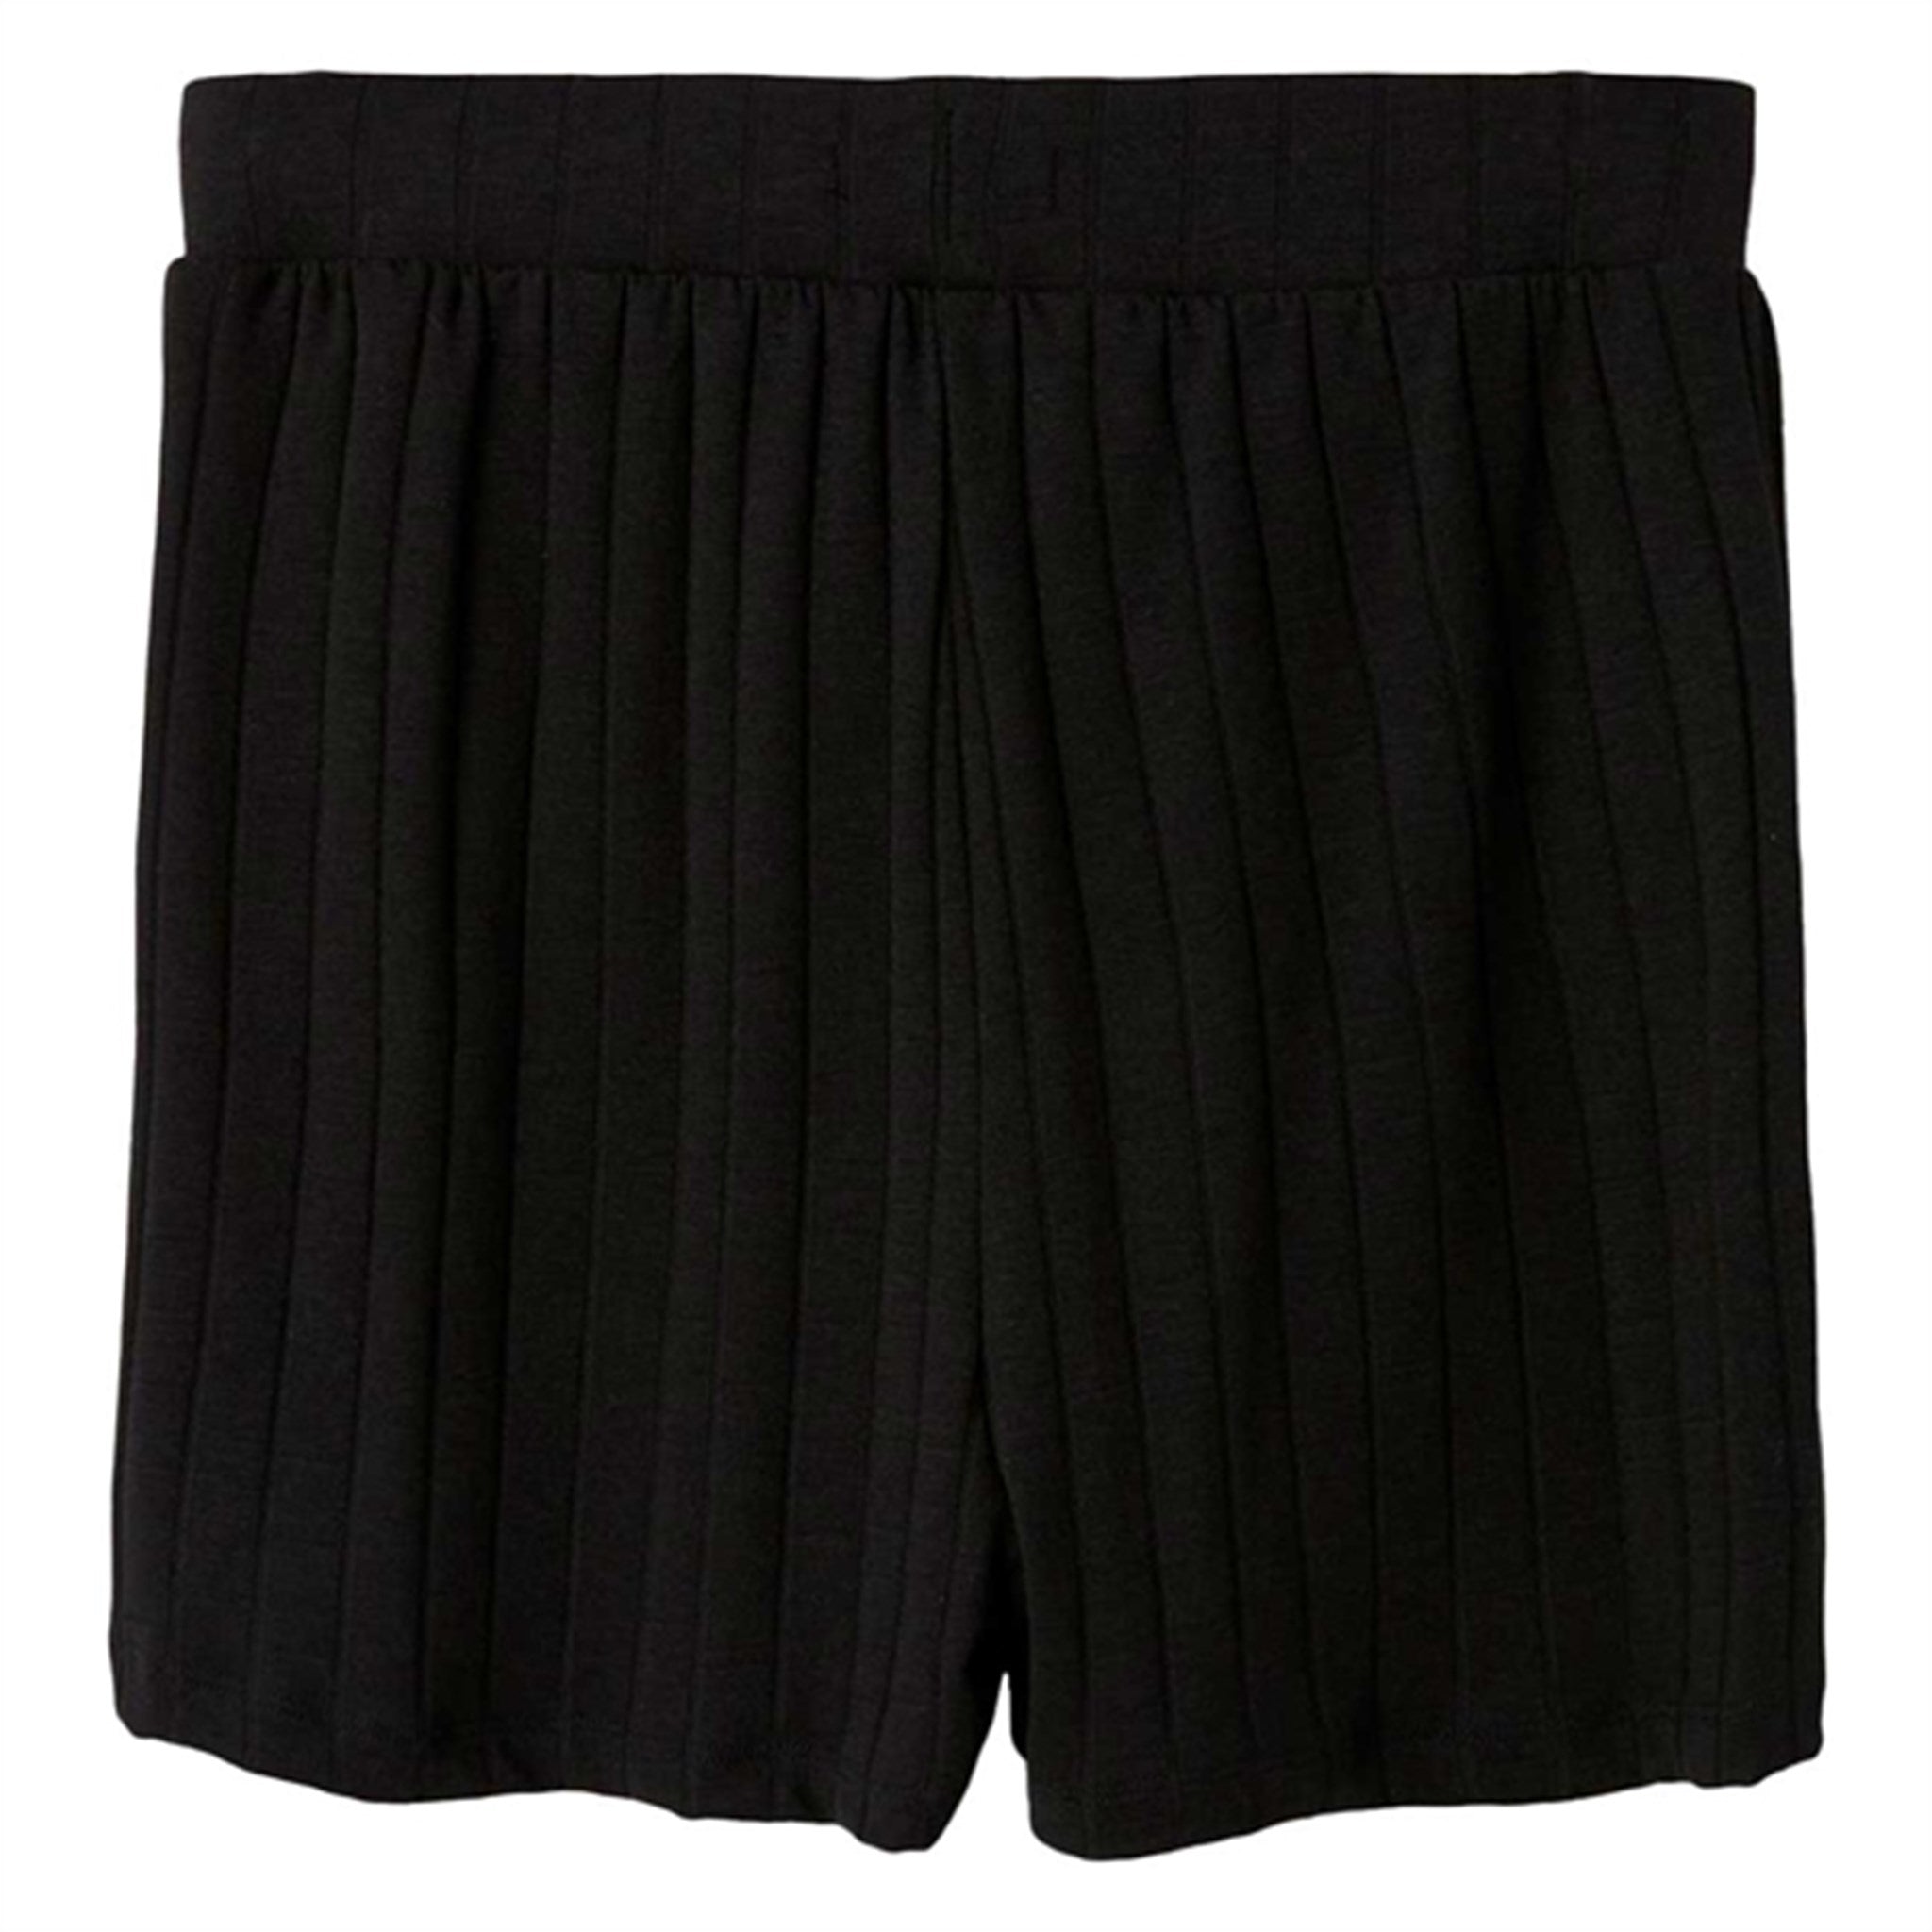 Name it Black Dunne Noos Shorts 2